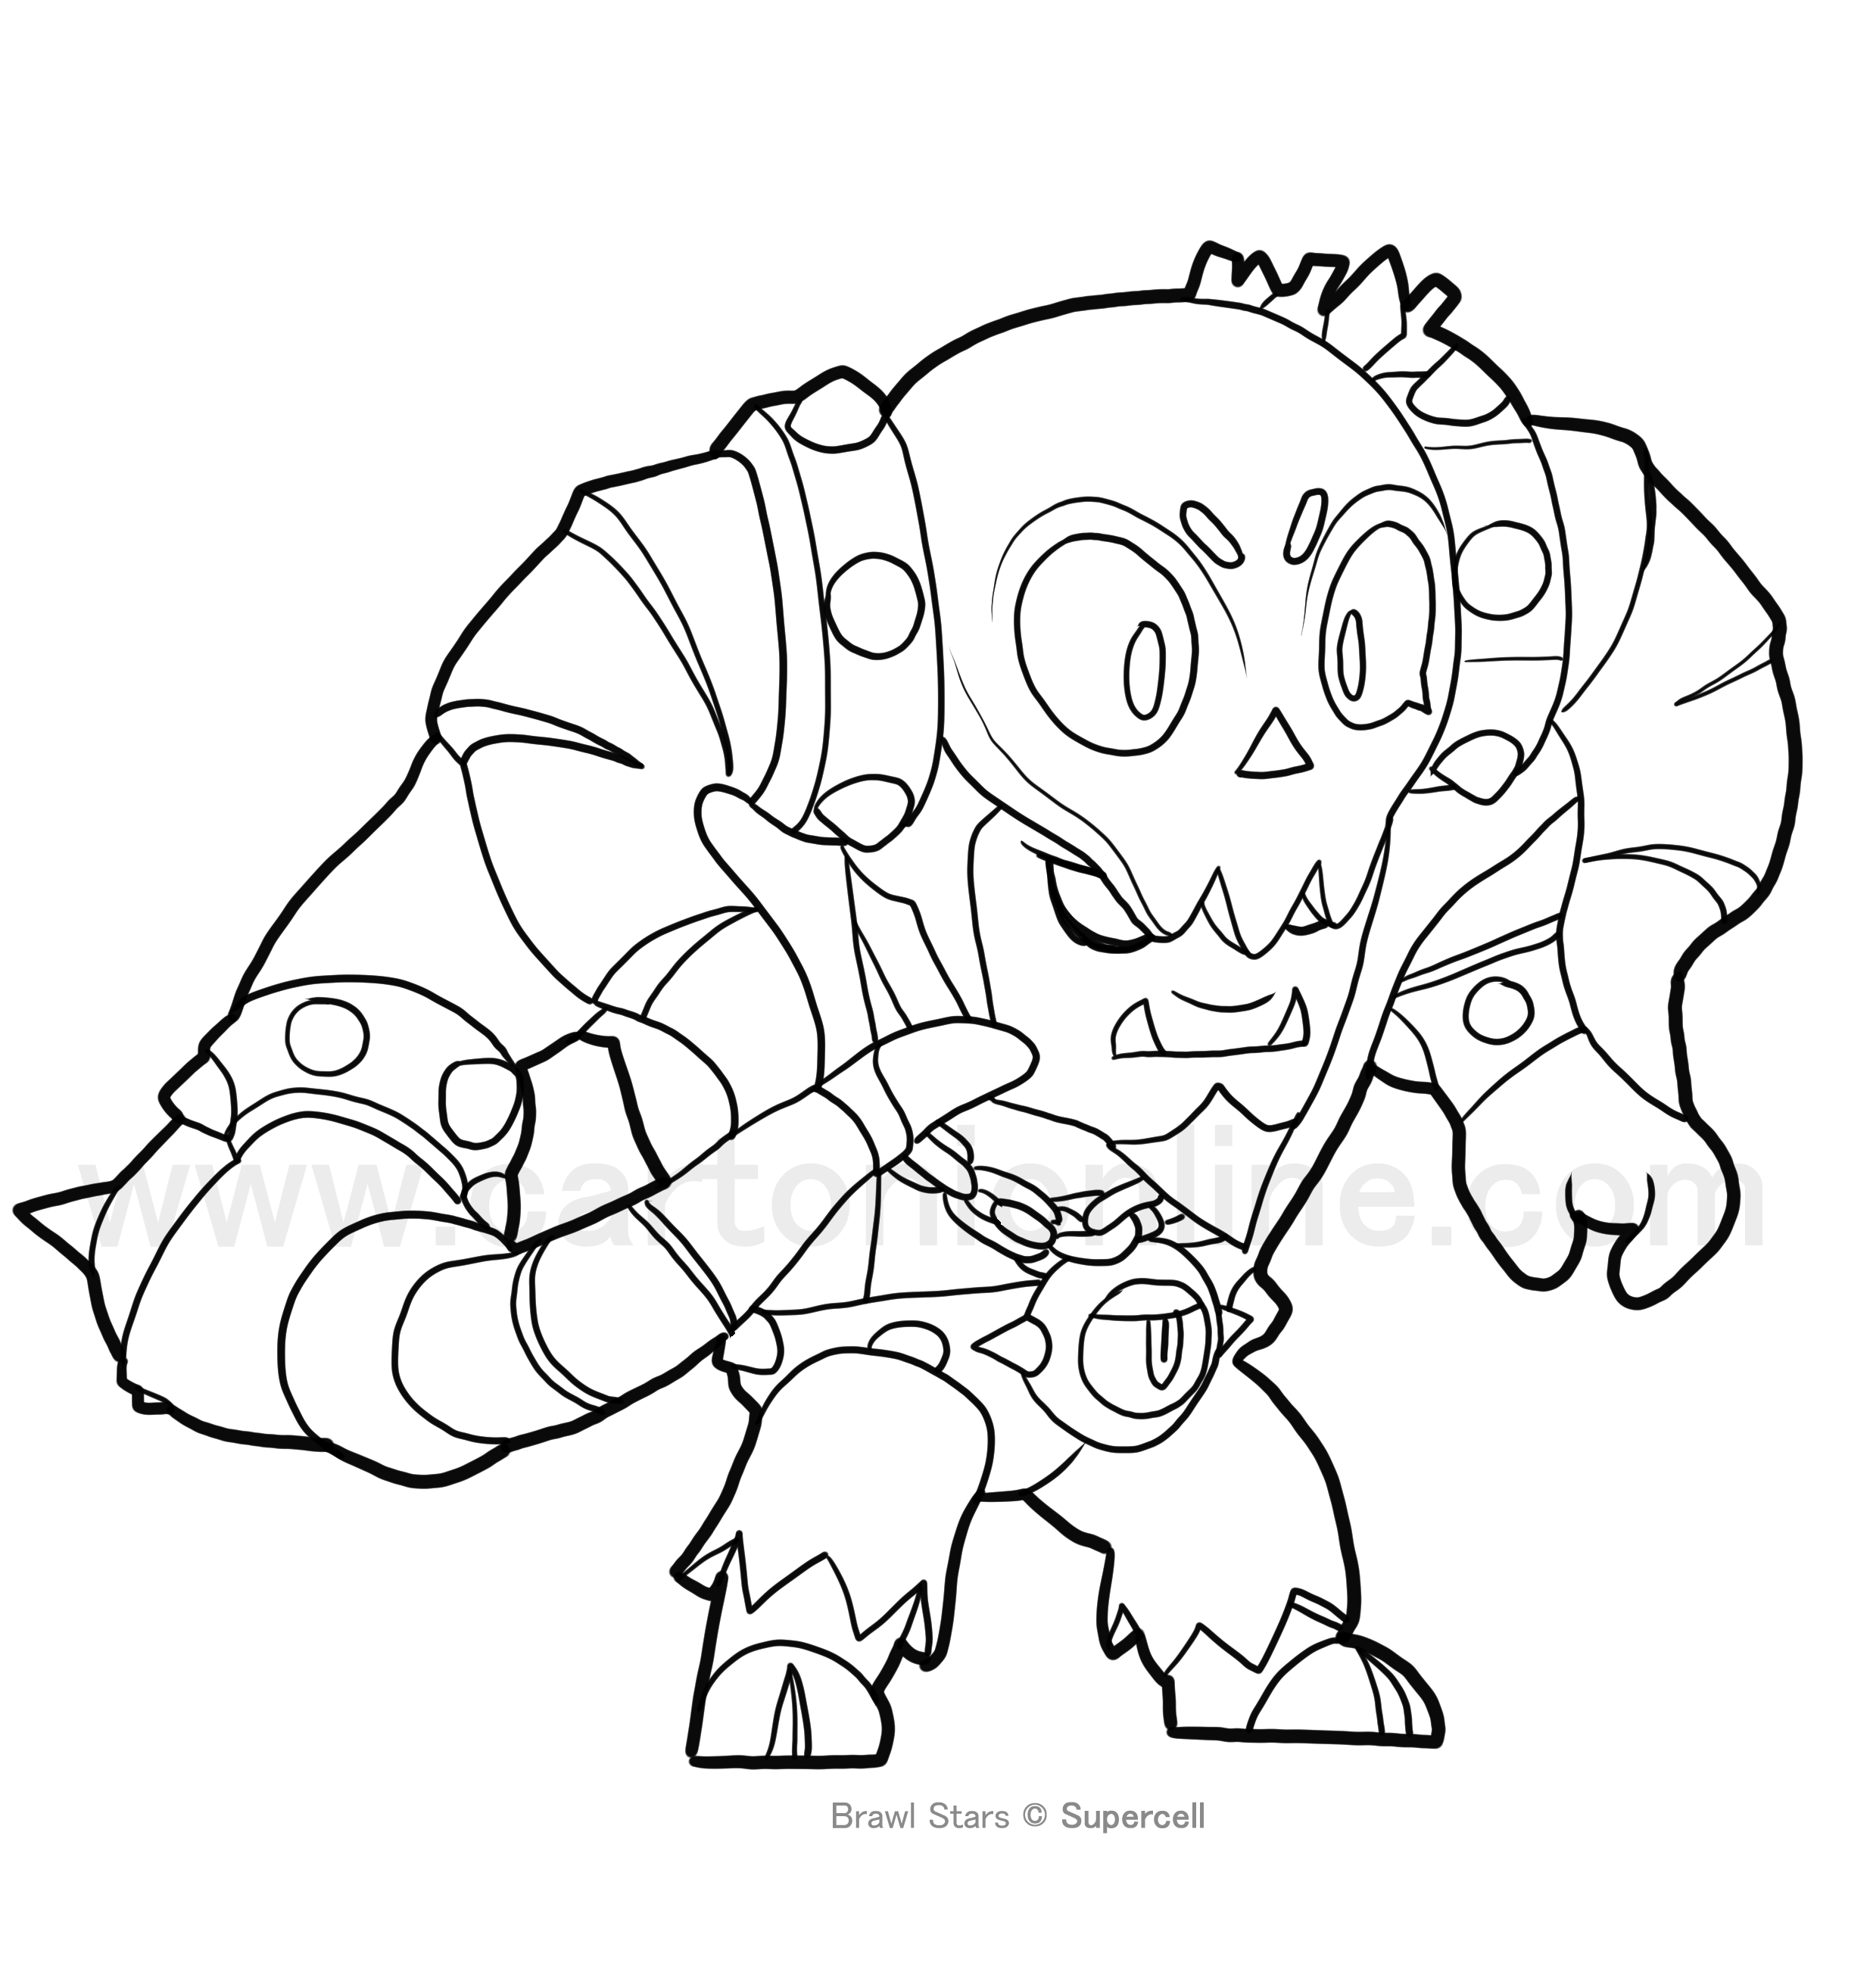 Underworld Bo from Brawl Stars coloring page to print and coloring